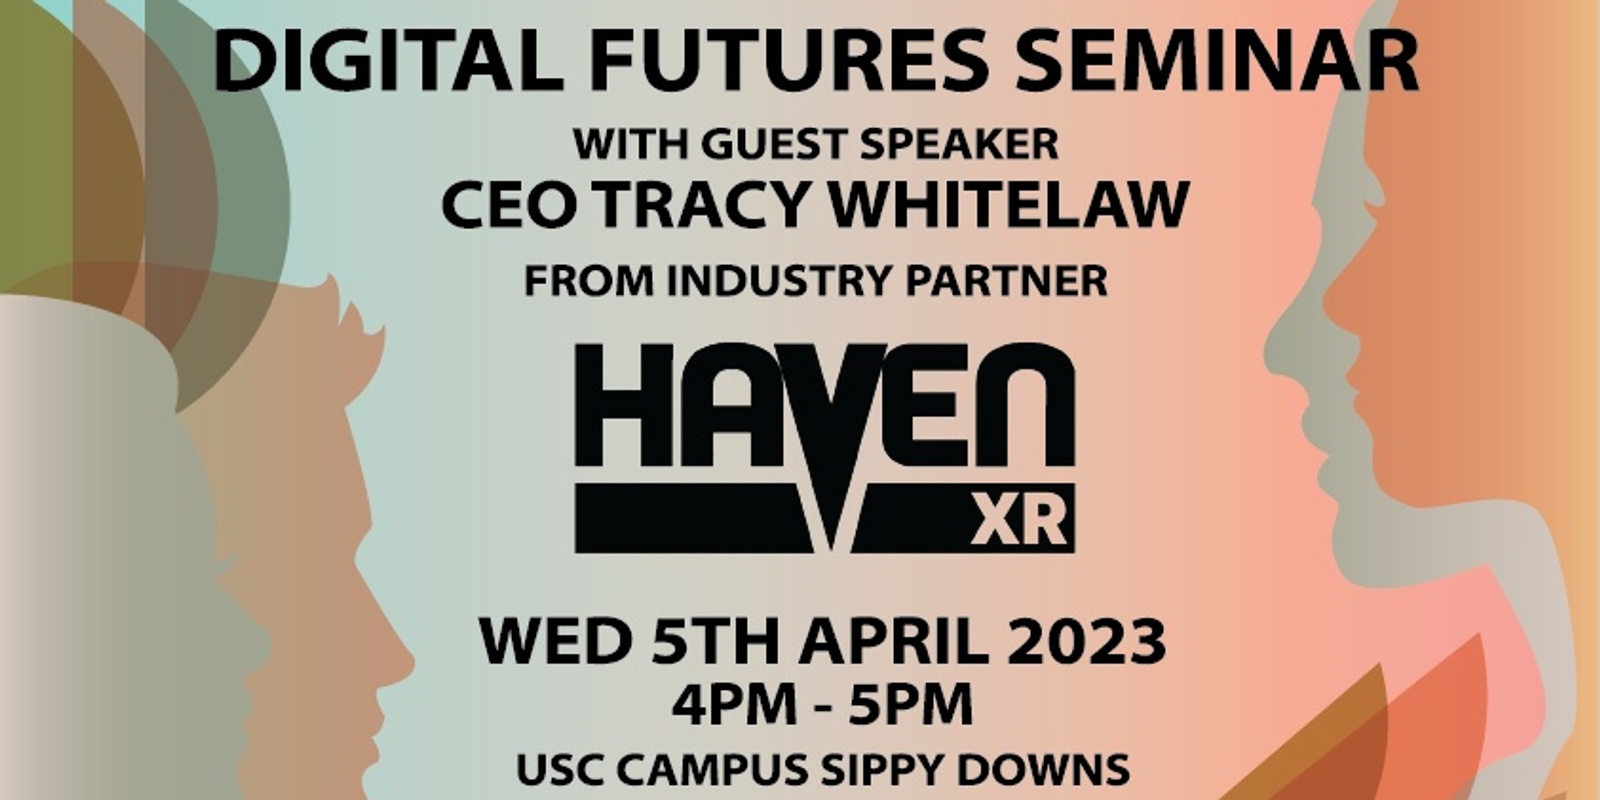 Banner image for DIGITAL CULTURE SEMINAR - HavenXR CEO Tracy Whitelaw